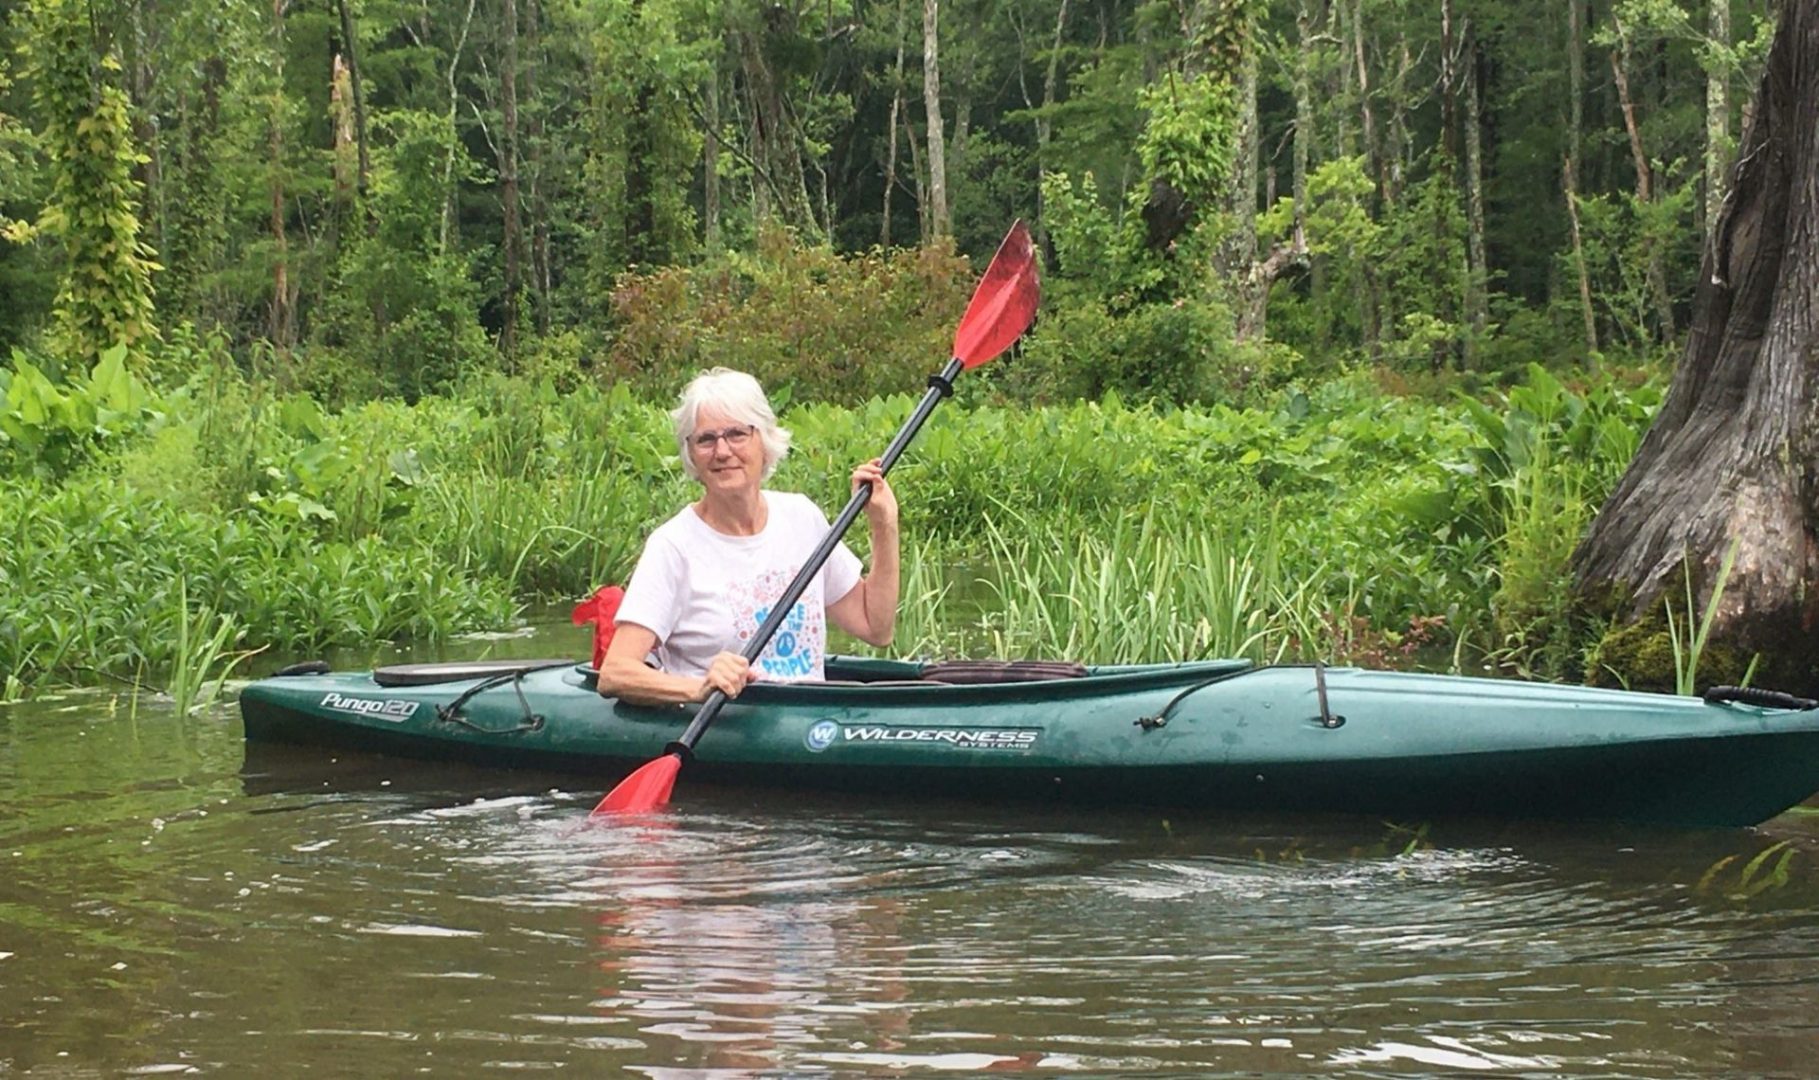 Woman kayaking on a serene lake surrounded by lush green trees and vegetation.